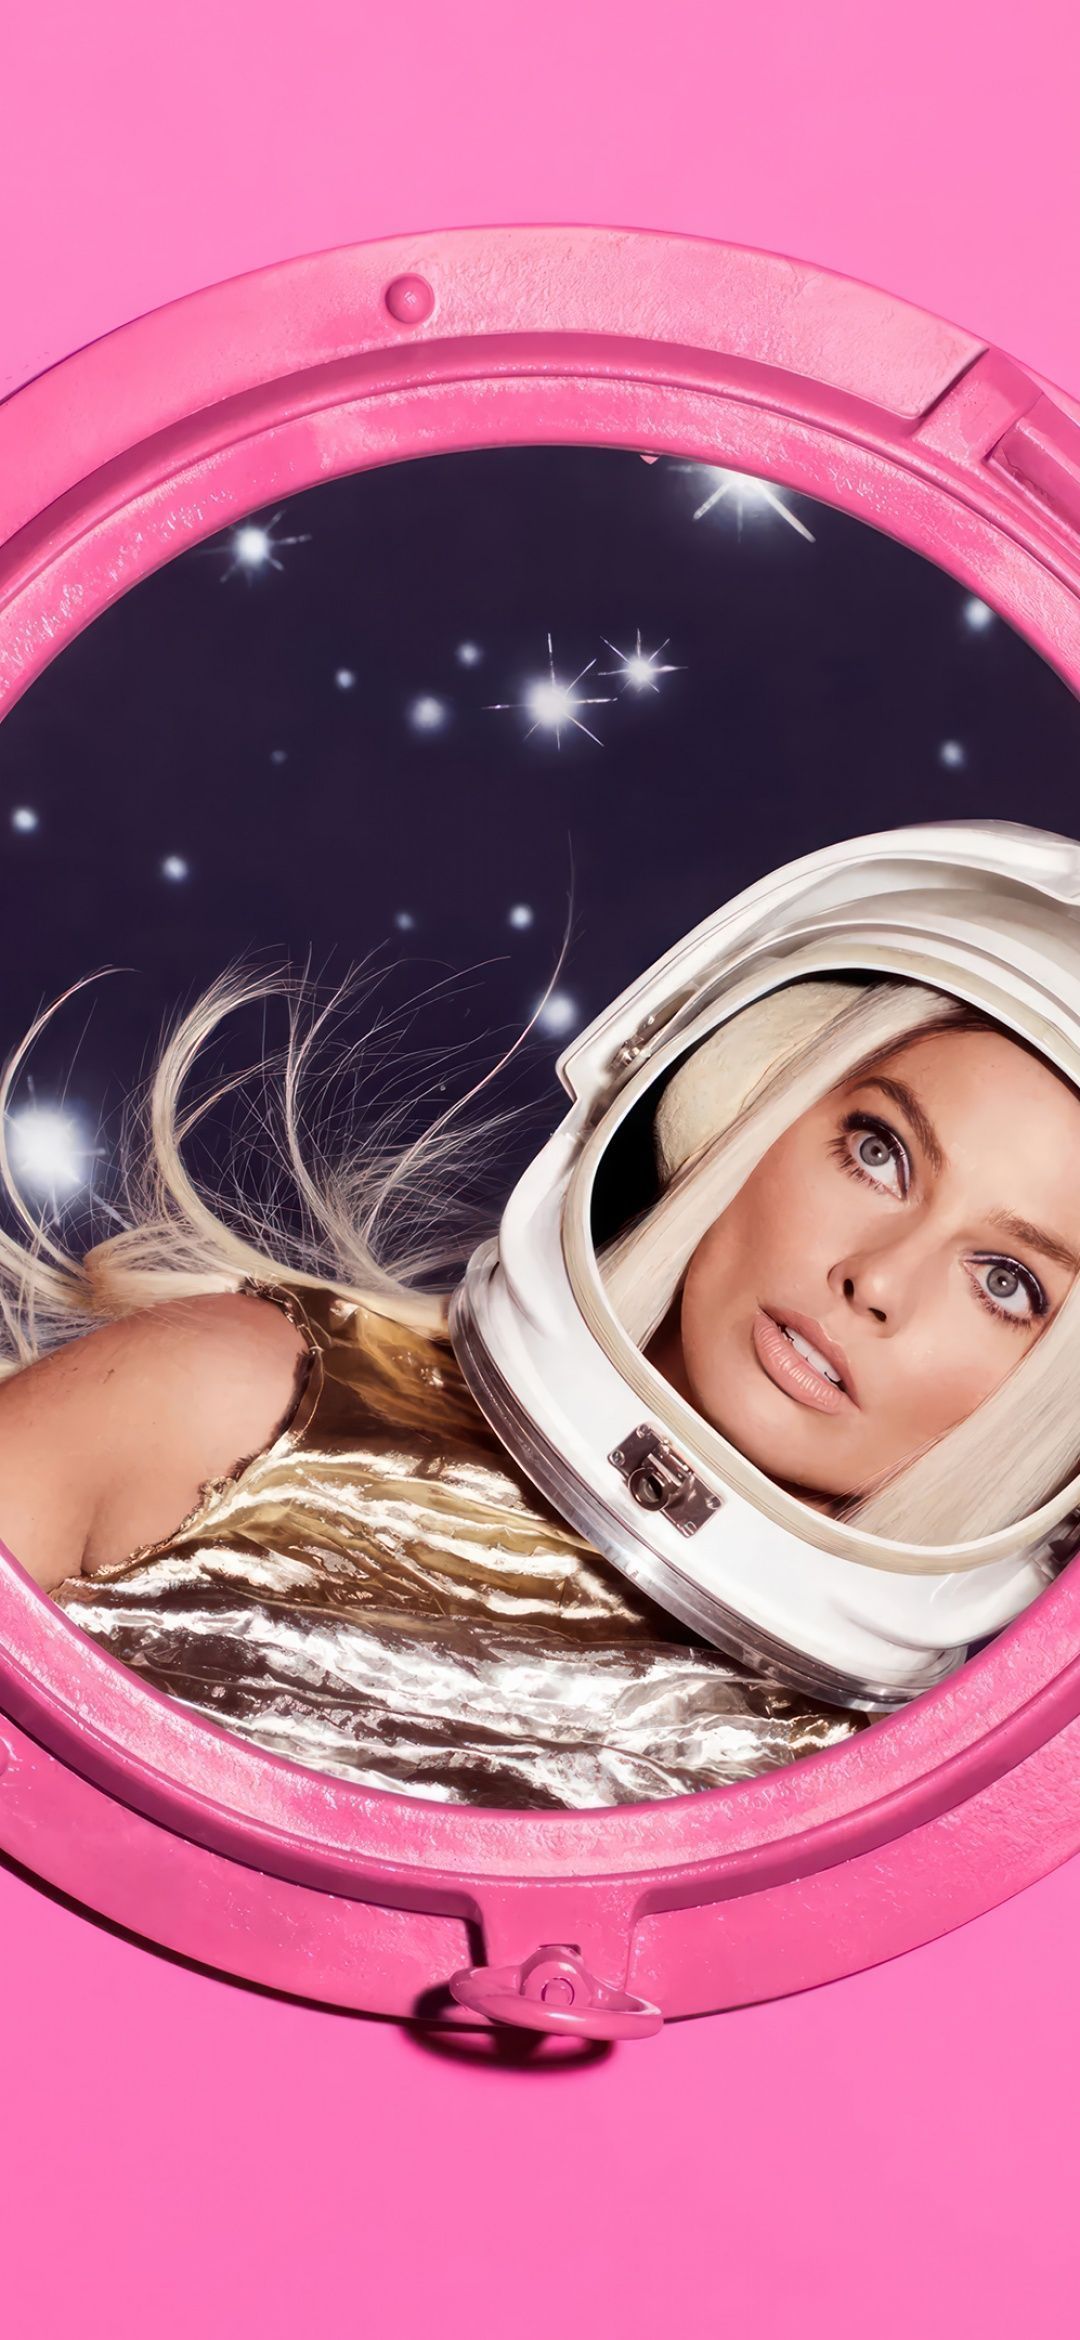 IPhone wallpaper with a photo of a woman in an astronaut suit - Barbie